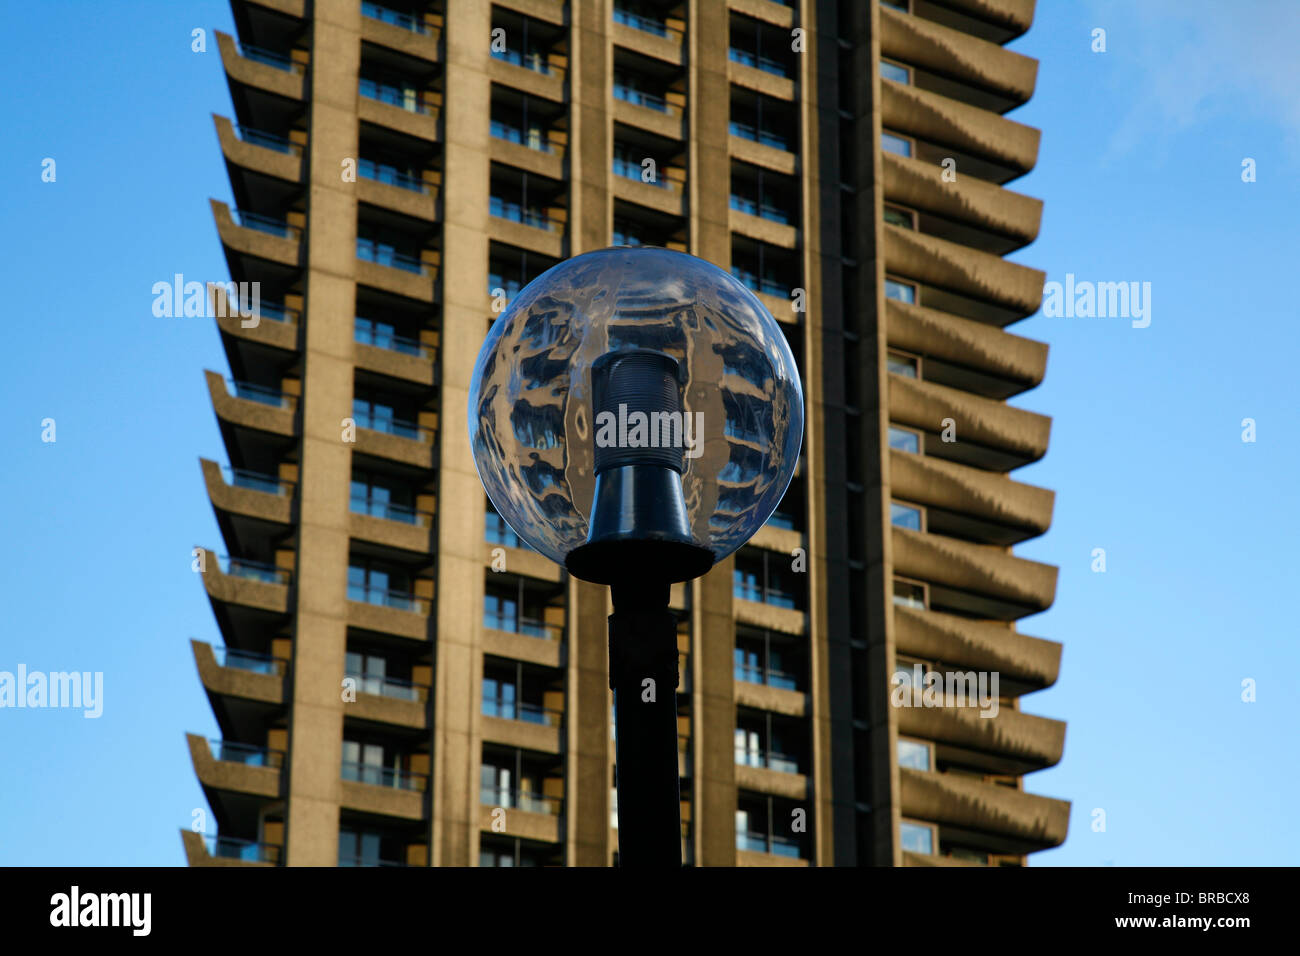 Lauderdale Tower on the Barbican estate, City of London, UK Stock Photo